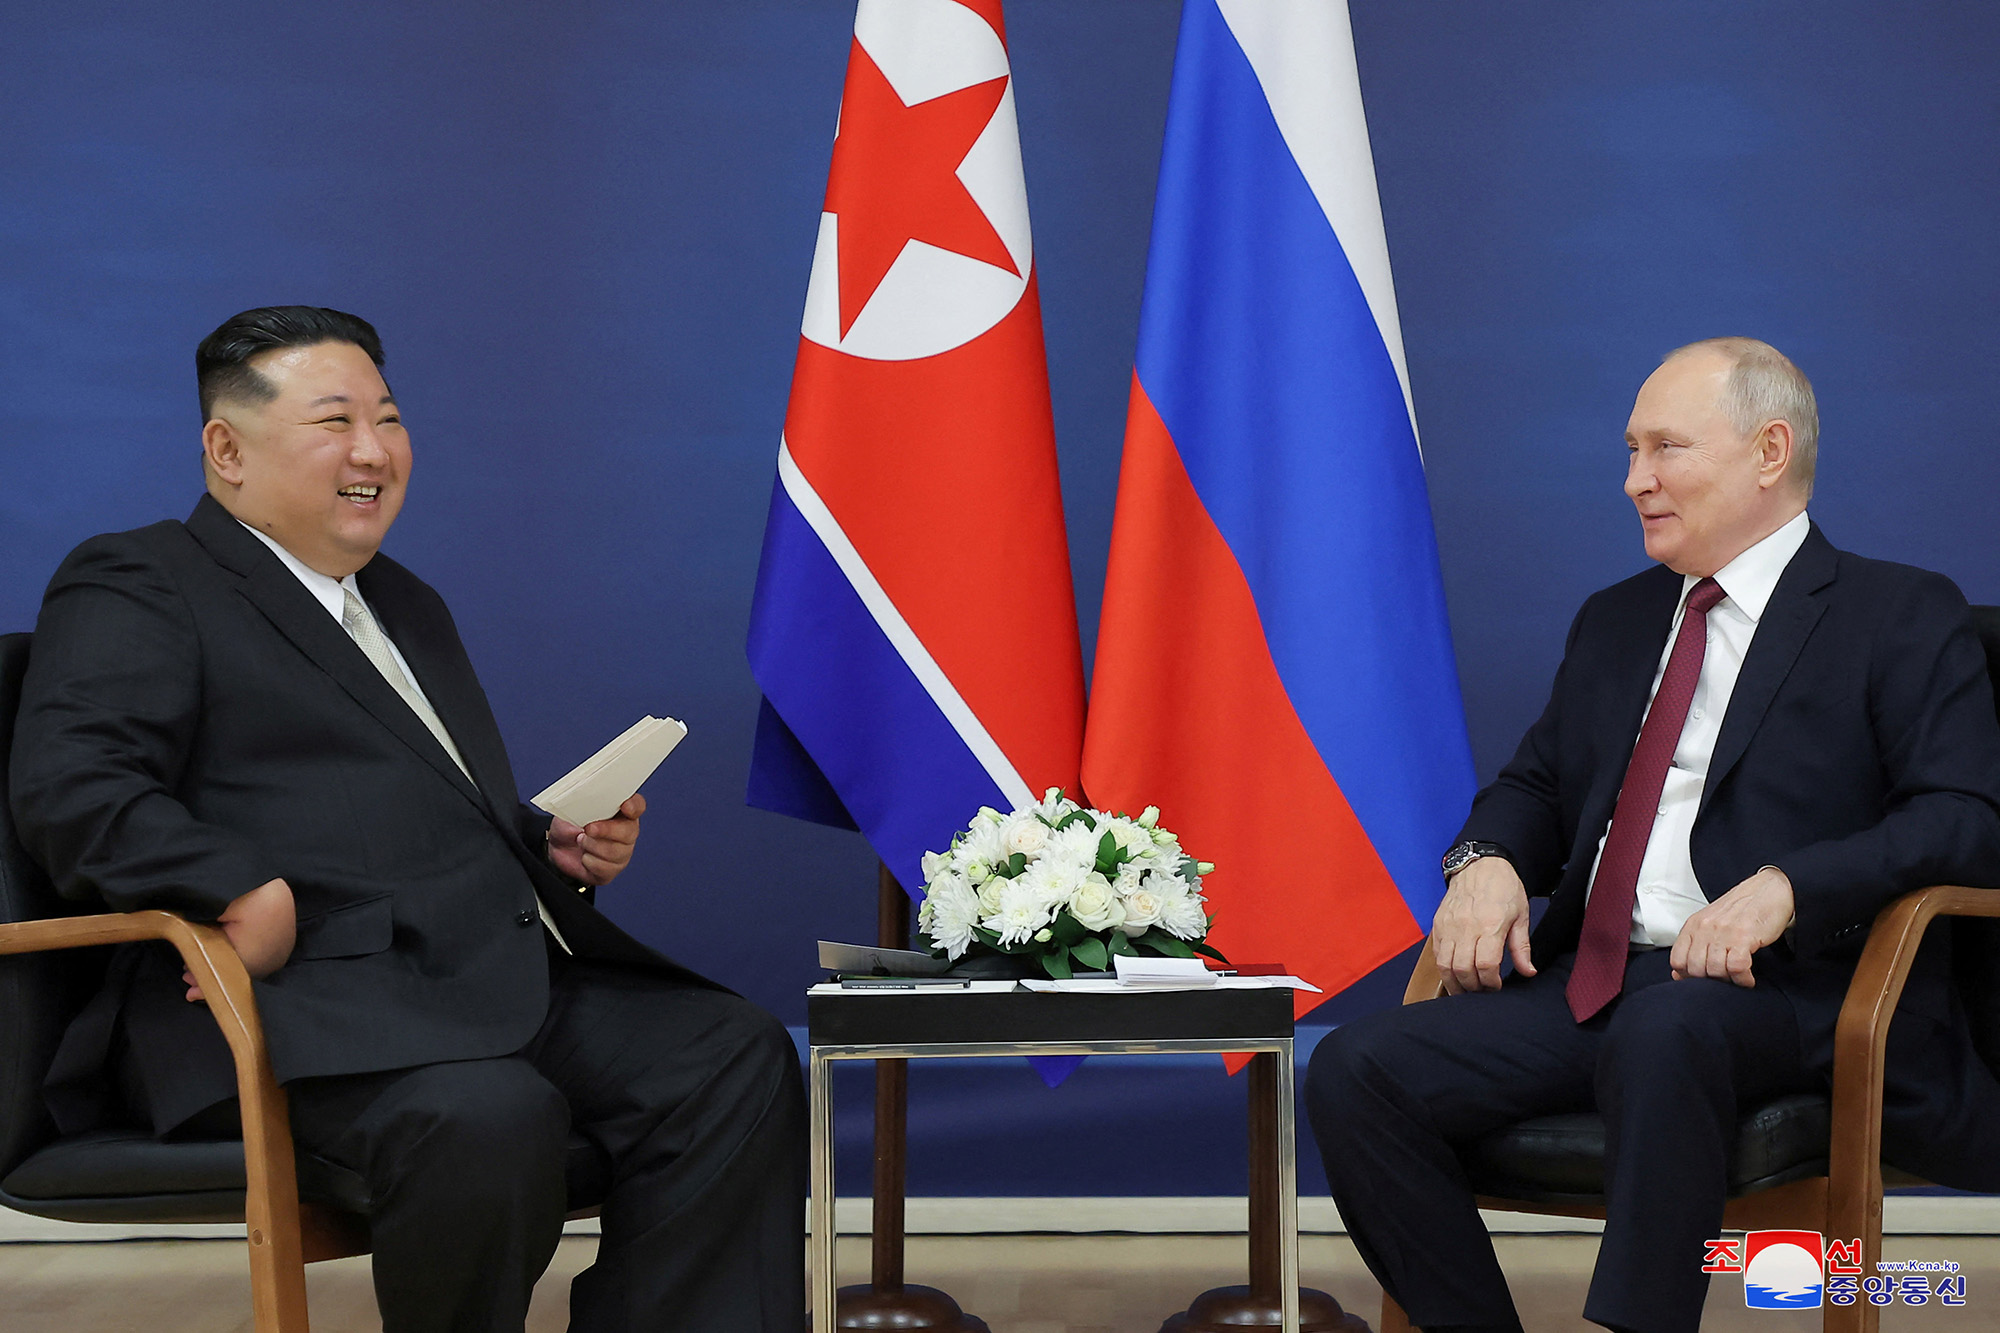 Russia's President Vladimir Putin, right, and North Korea's leader Kim Jong Un attend a meeting at the Vostochny Cosmodrome in the far eastern Amur region, Russia, on September 13.